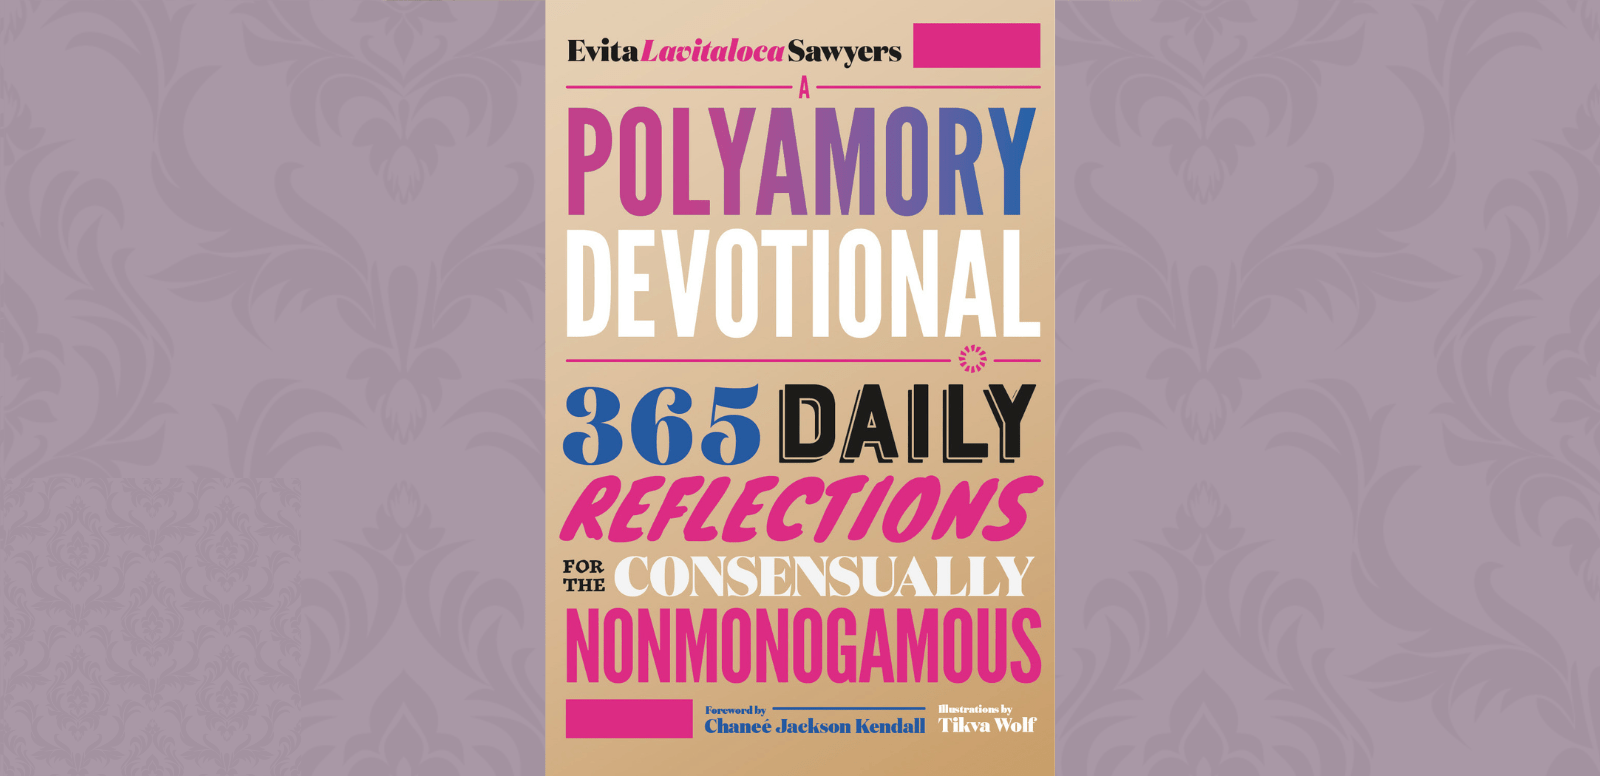 Five Daily Reflections for the Consensually Nonmonogamous